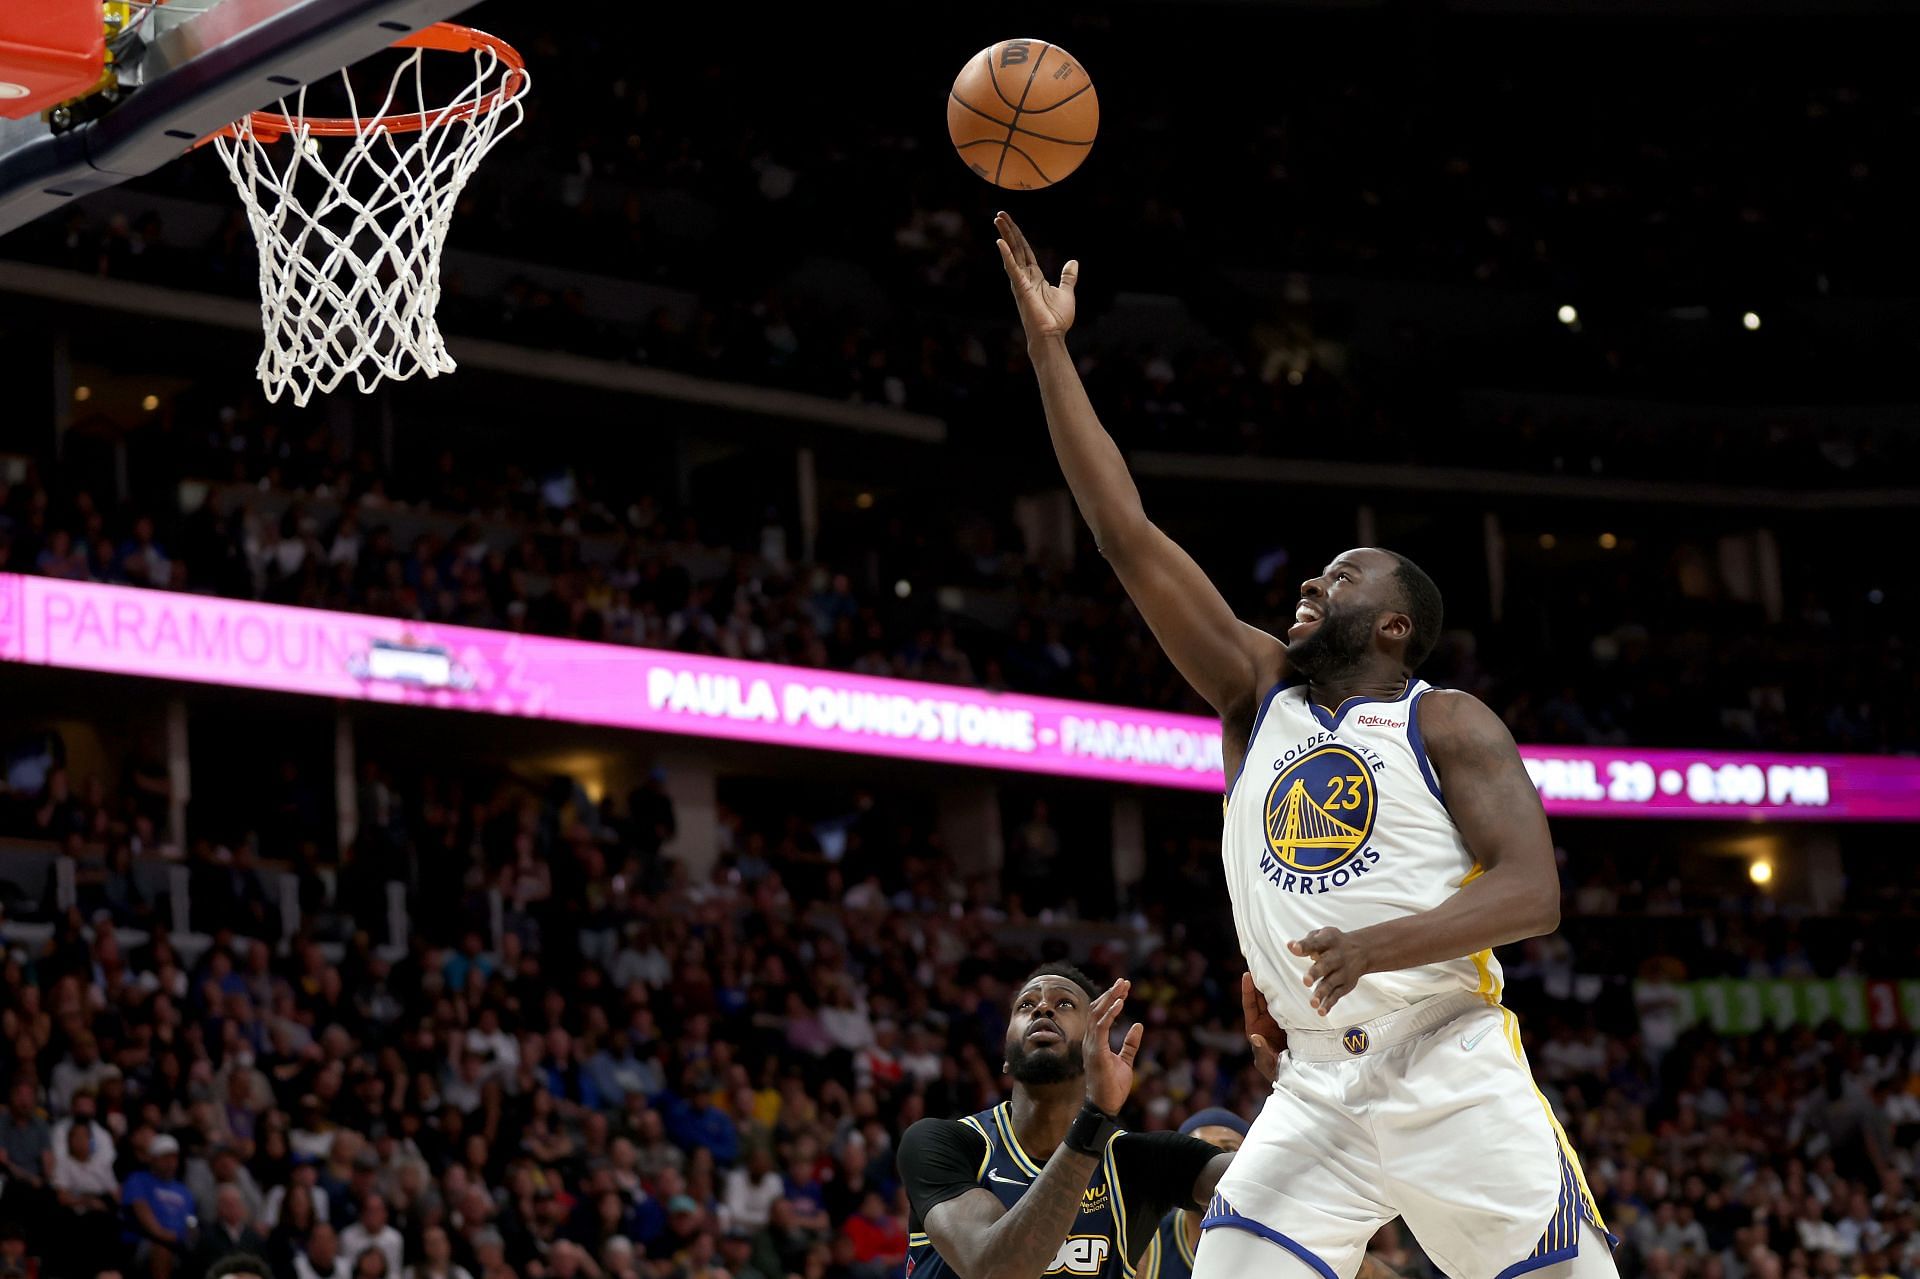 Golden State Warriors vs. Denver Nuggets &mdash; Game 4; Draymond Green drives for a lay up.